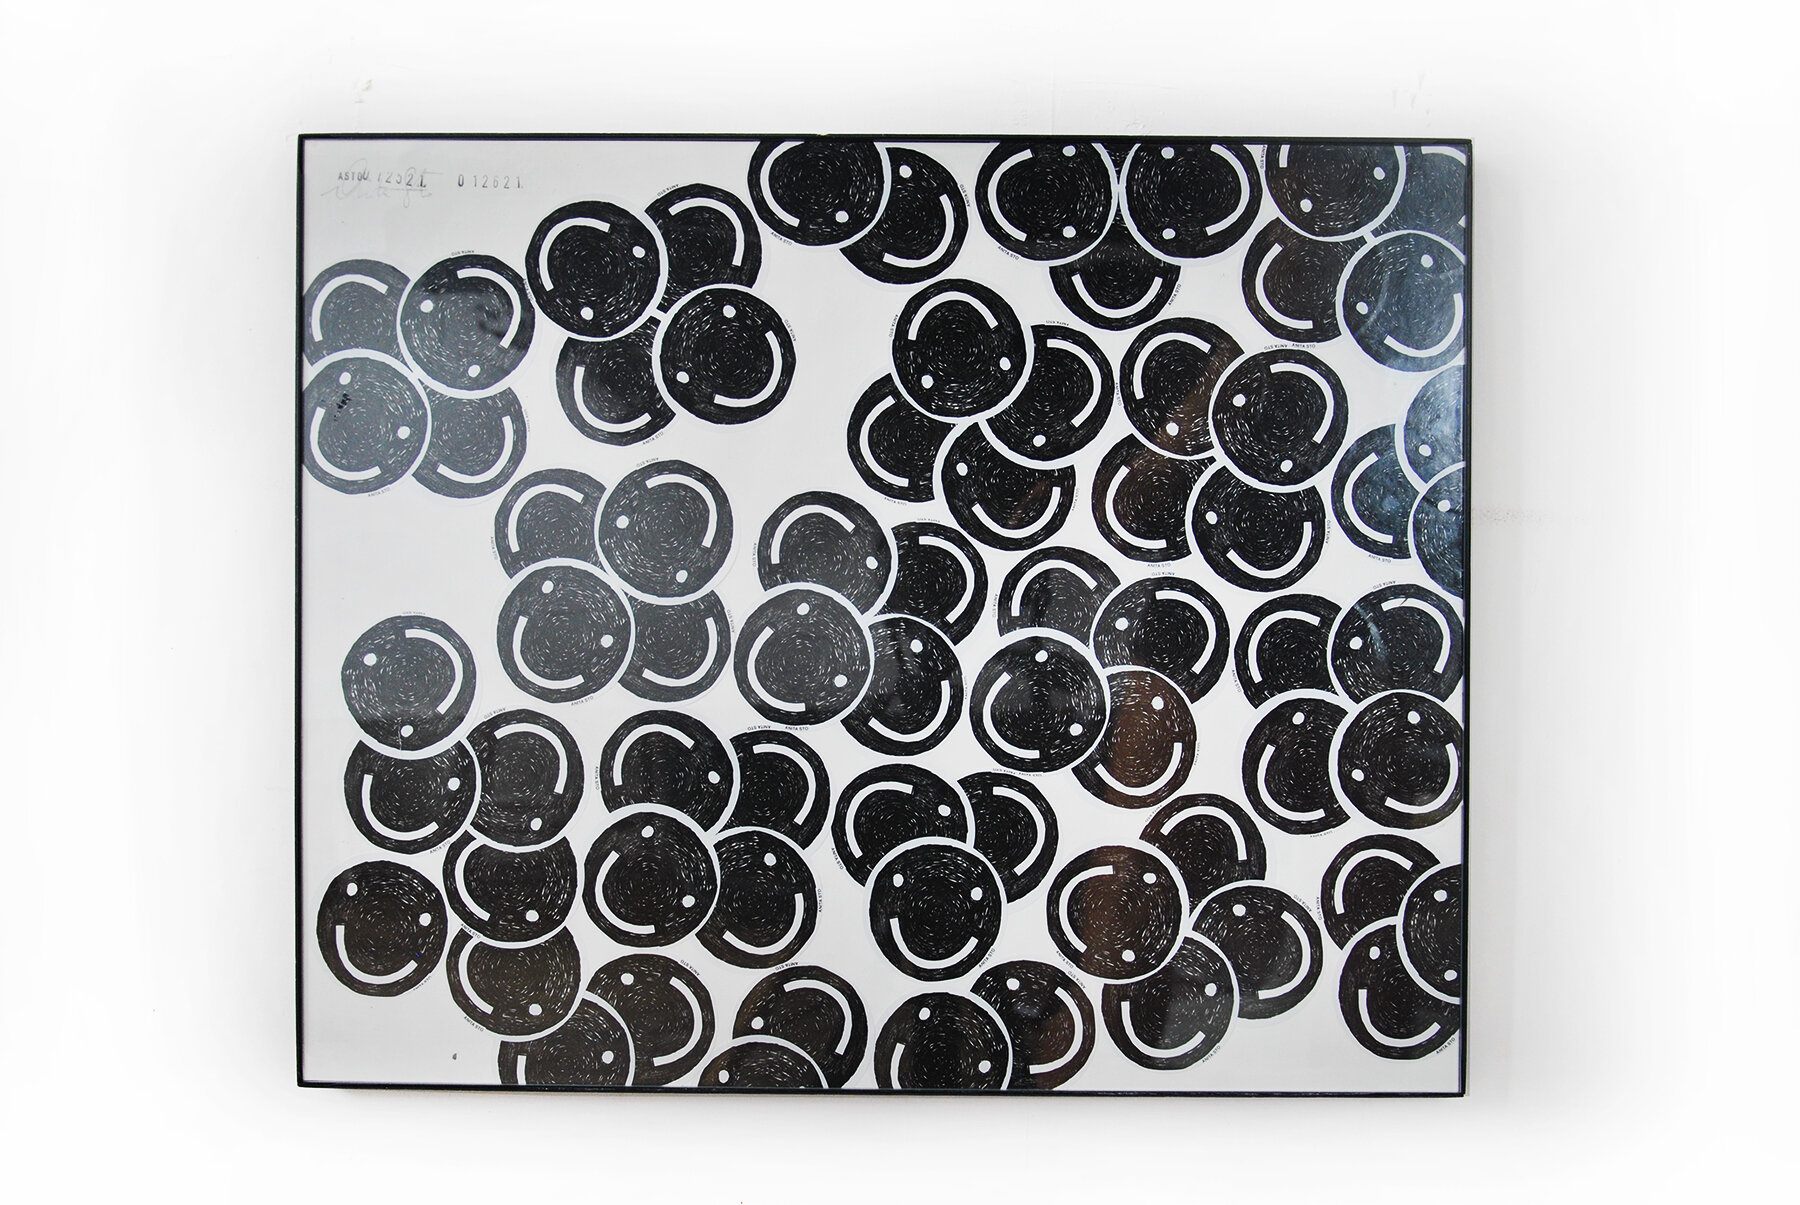   SMILING FACES 5  Vinyl stickers on  Paper Vinyl frame and Glass 16” x 20” 2020 